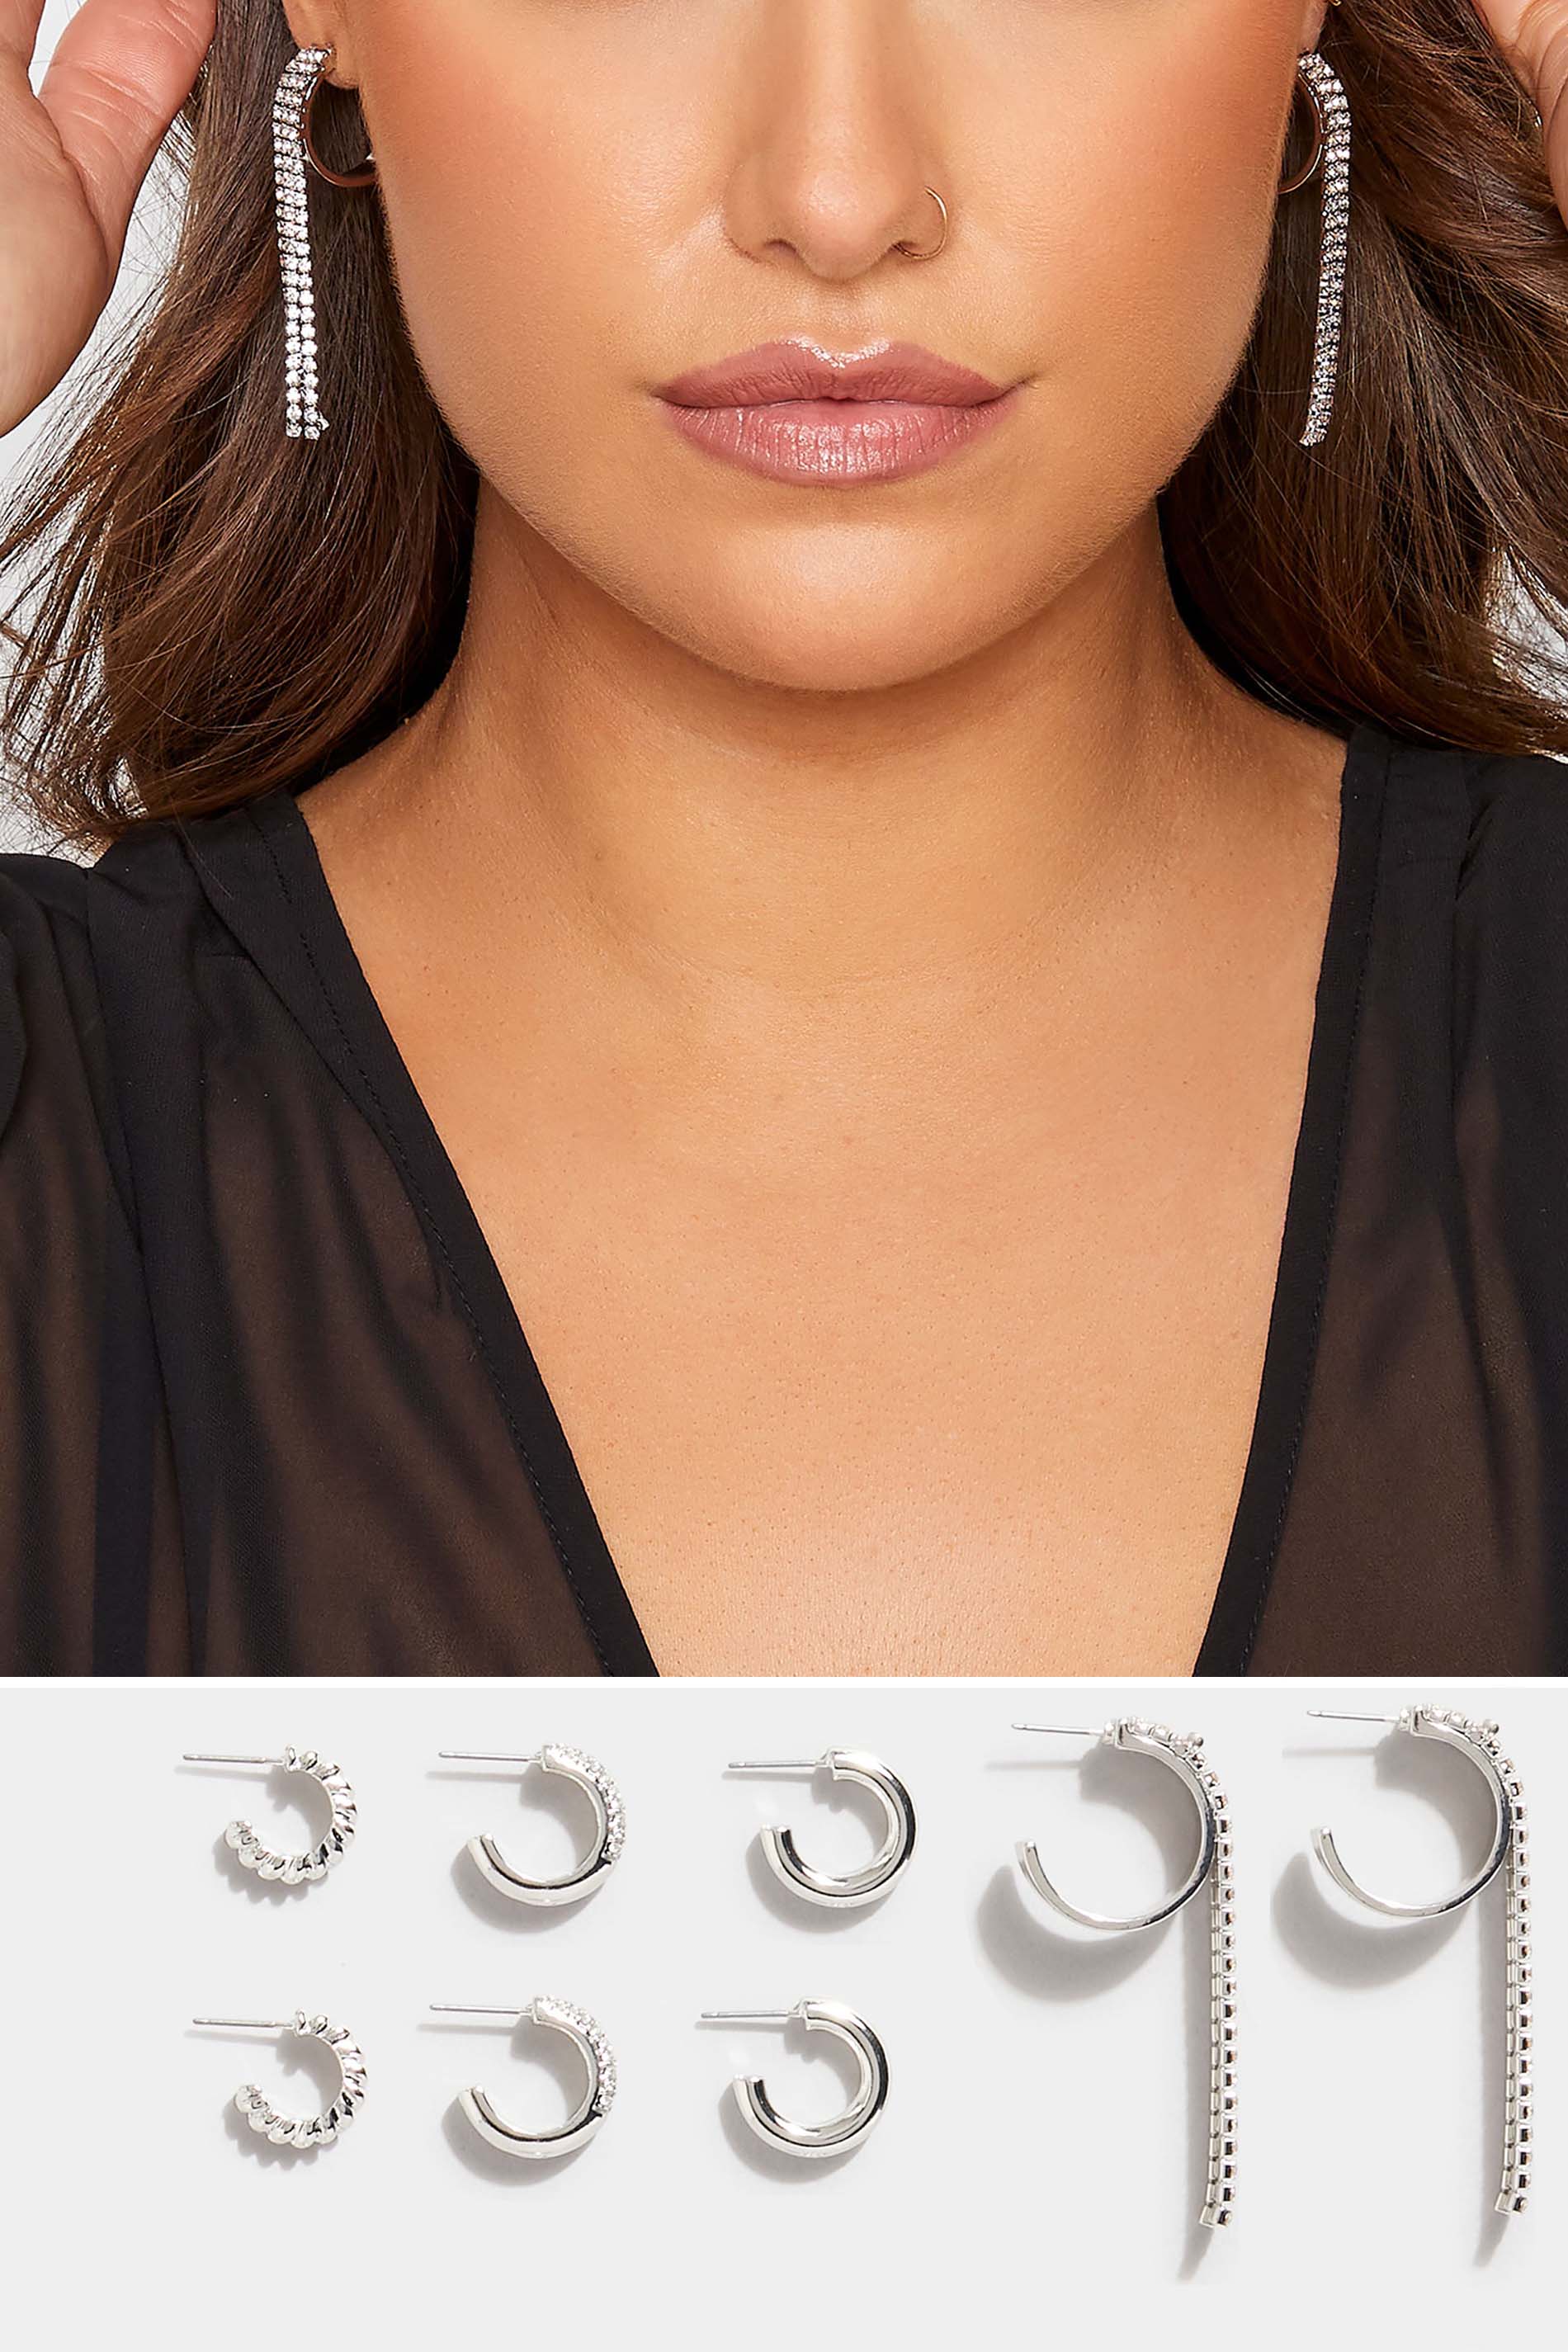 4 PACK Plus Size Silver Tone Assorted Diamante Hoop Earrings | Yours Clothing 1